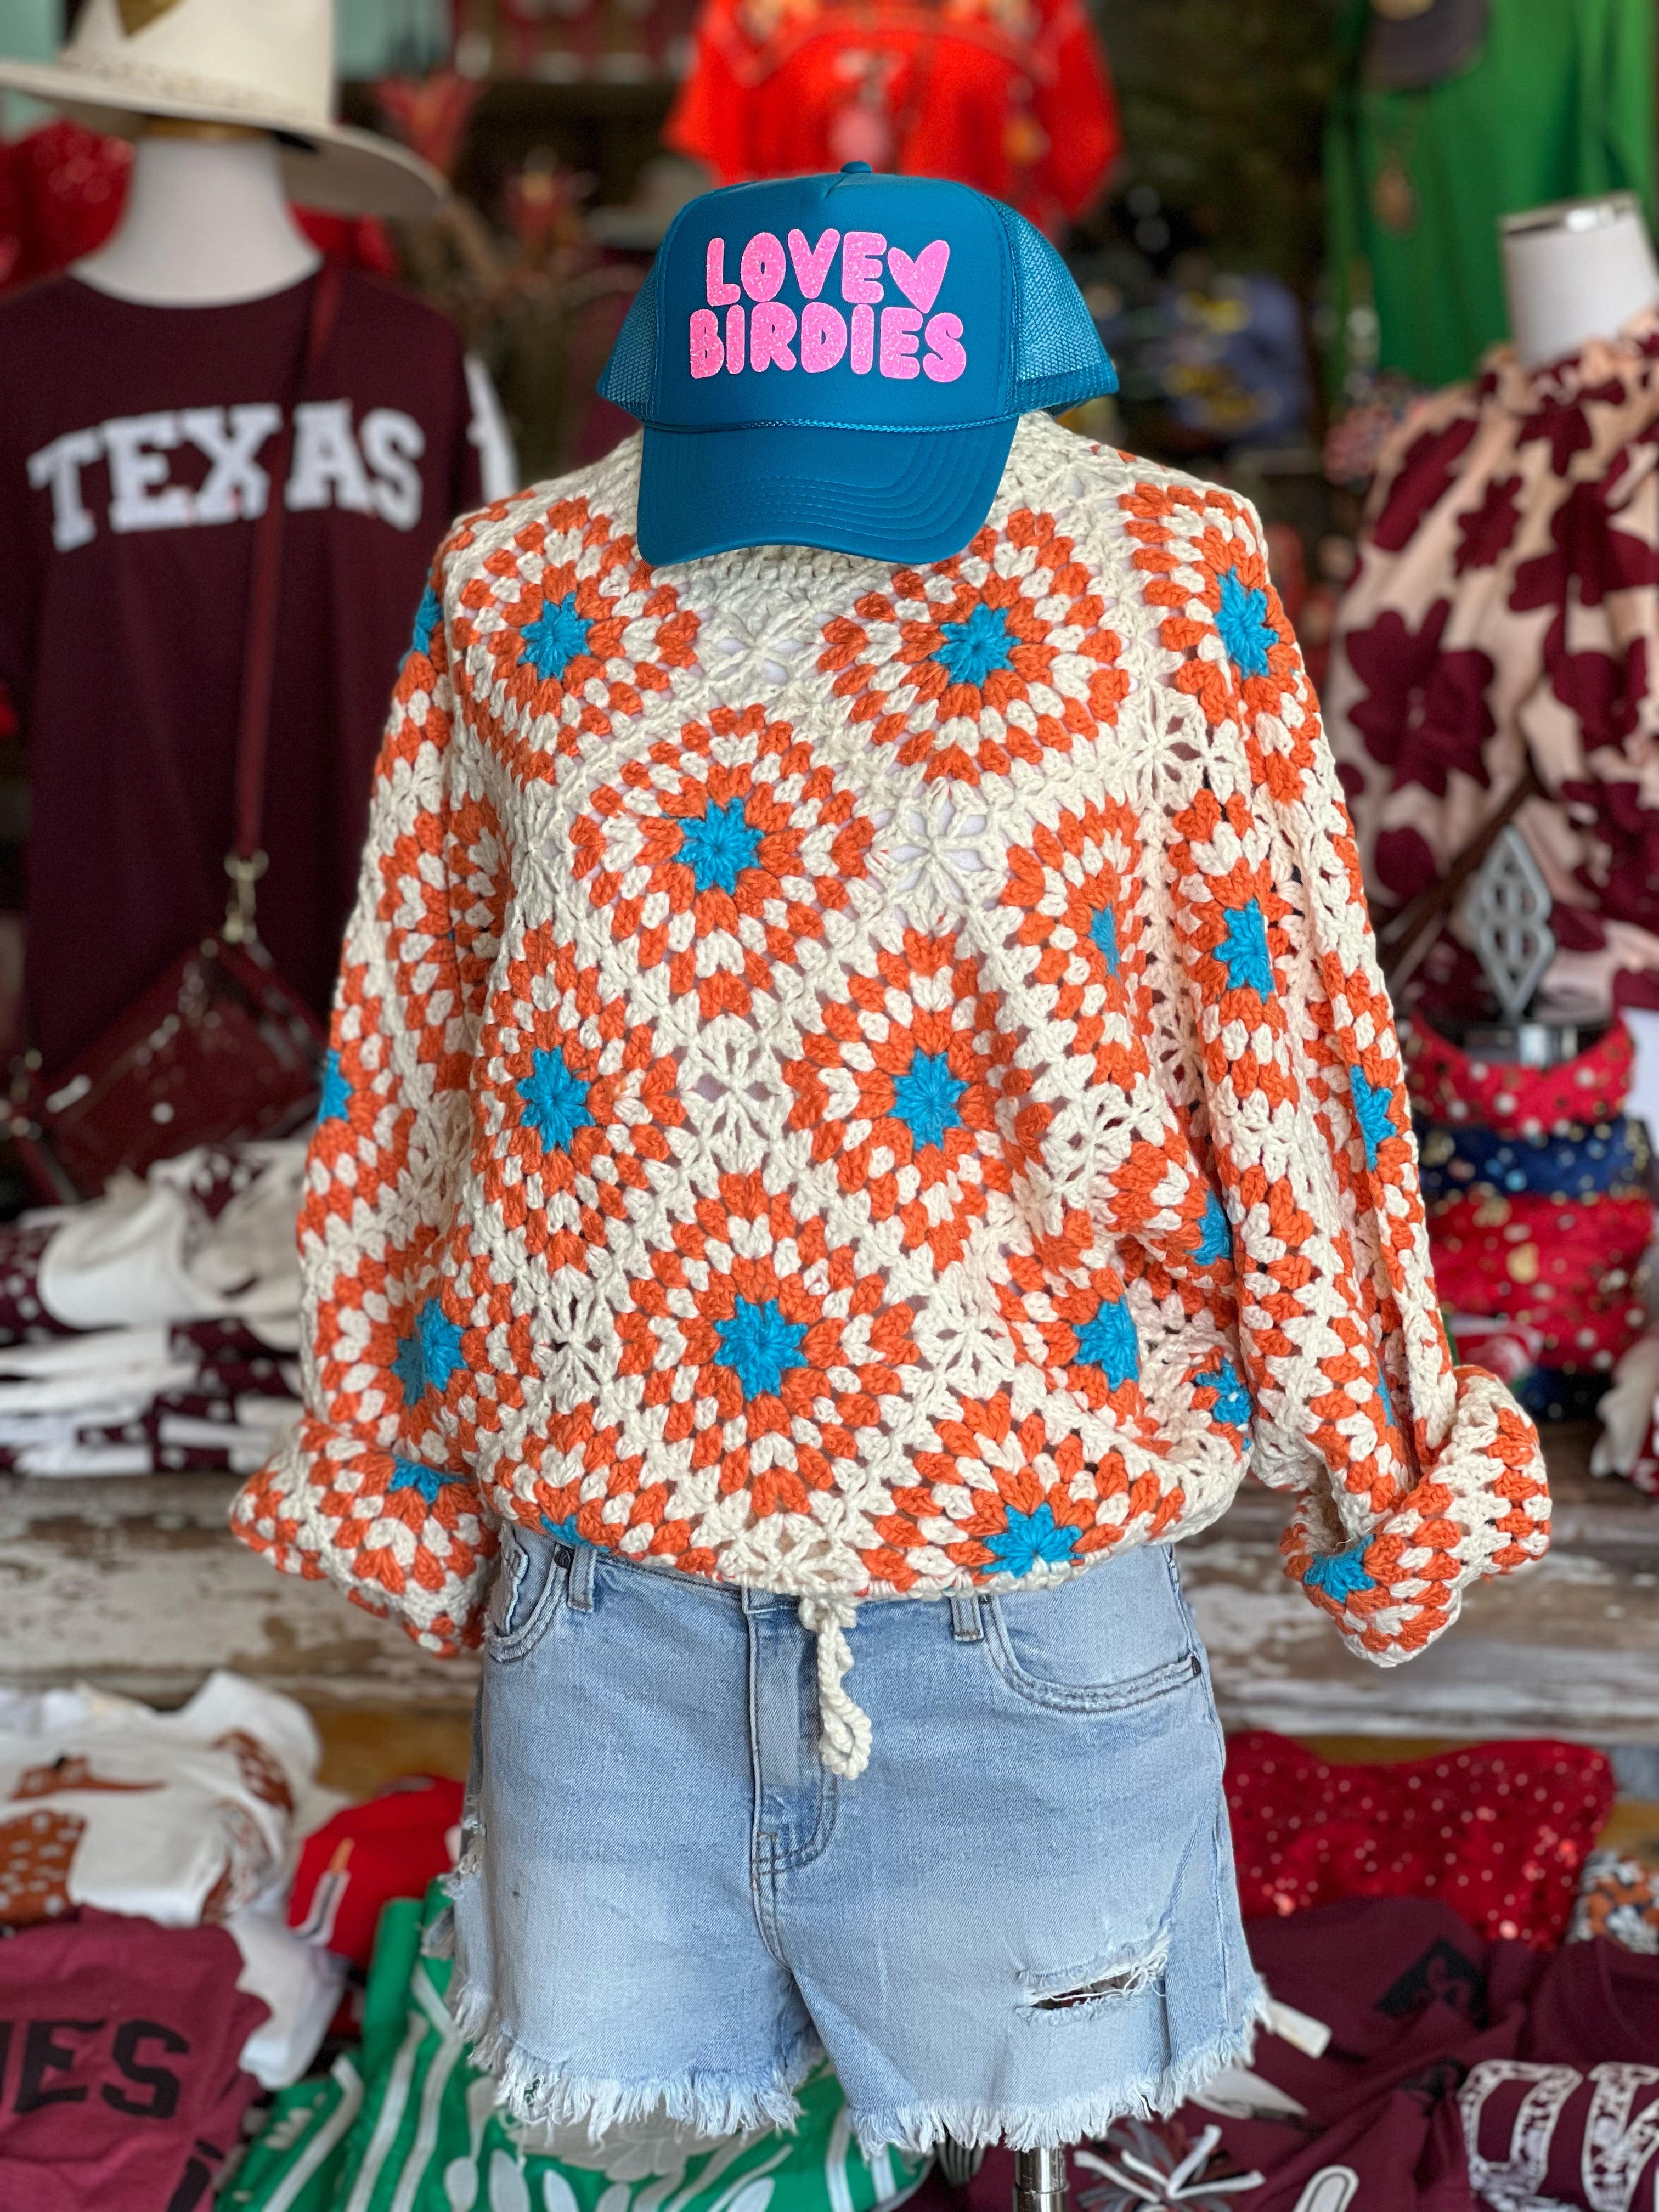 Granny Square Knit Sweater (Cream or Turquoise)